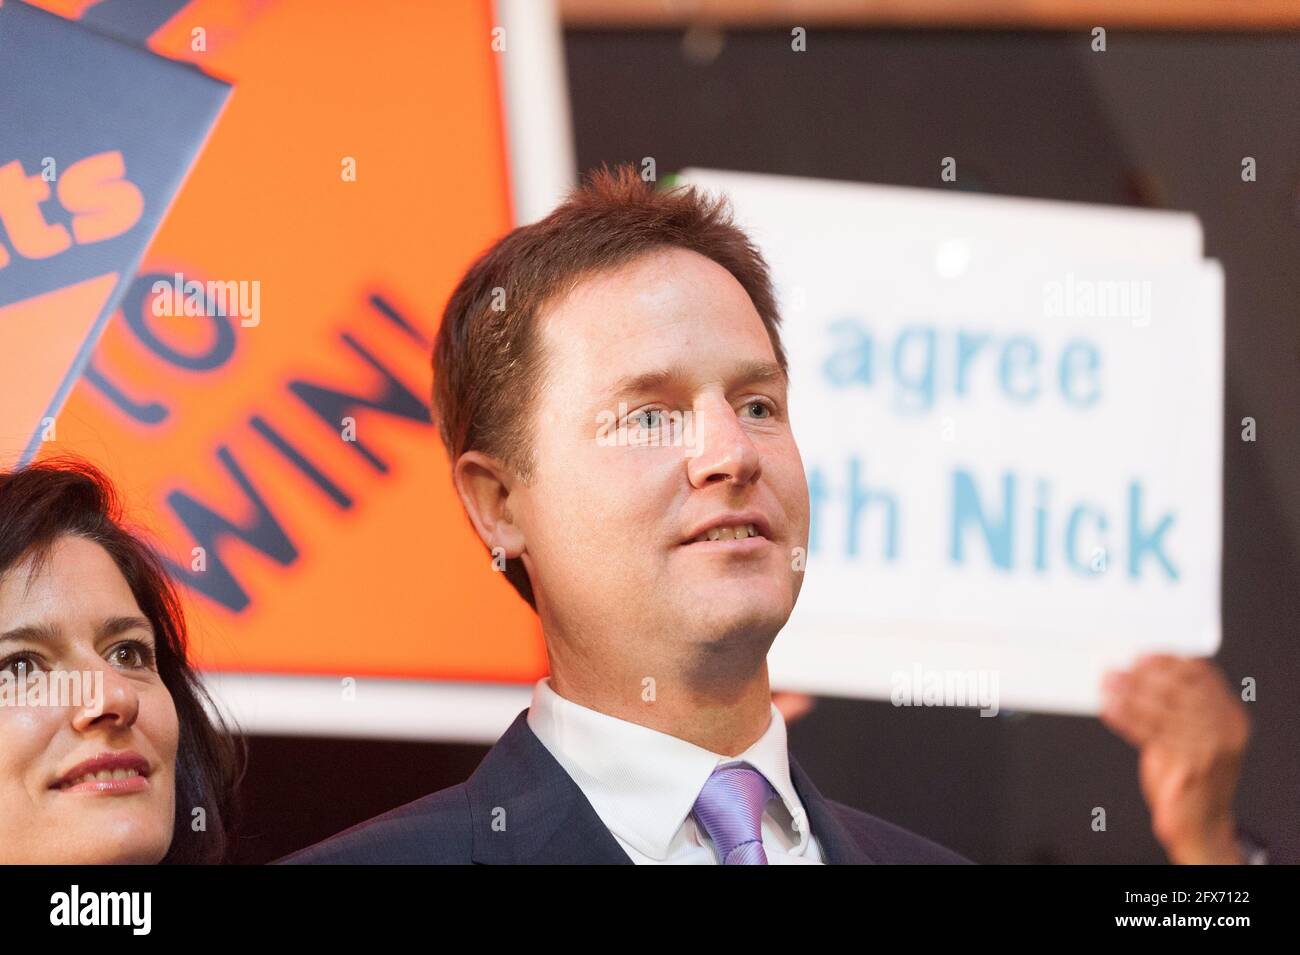 Nick Clegg, leader of the Liberal Democrats with his wife Nick Clegg/Wife Miriam González Durántez, campaigning in the 2010 general election at a public rally.  Palace Project, 5 Coburg Crescent, Tulse Hill, London, UK.  3 May 2010 Stock Photo